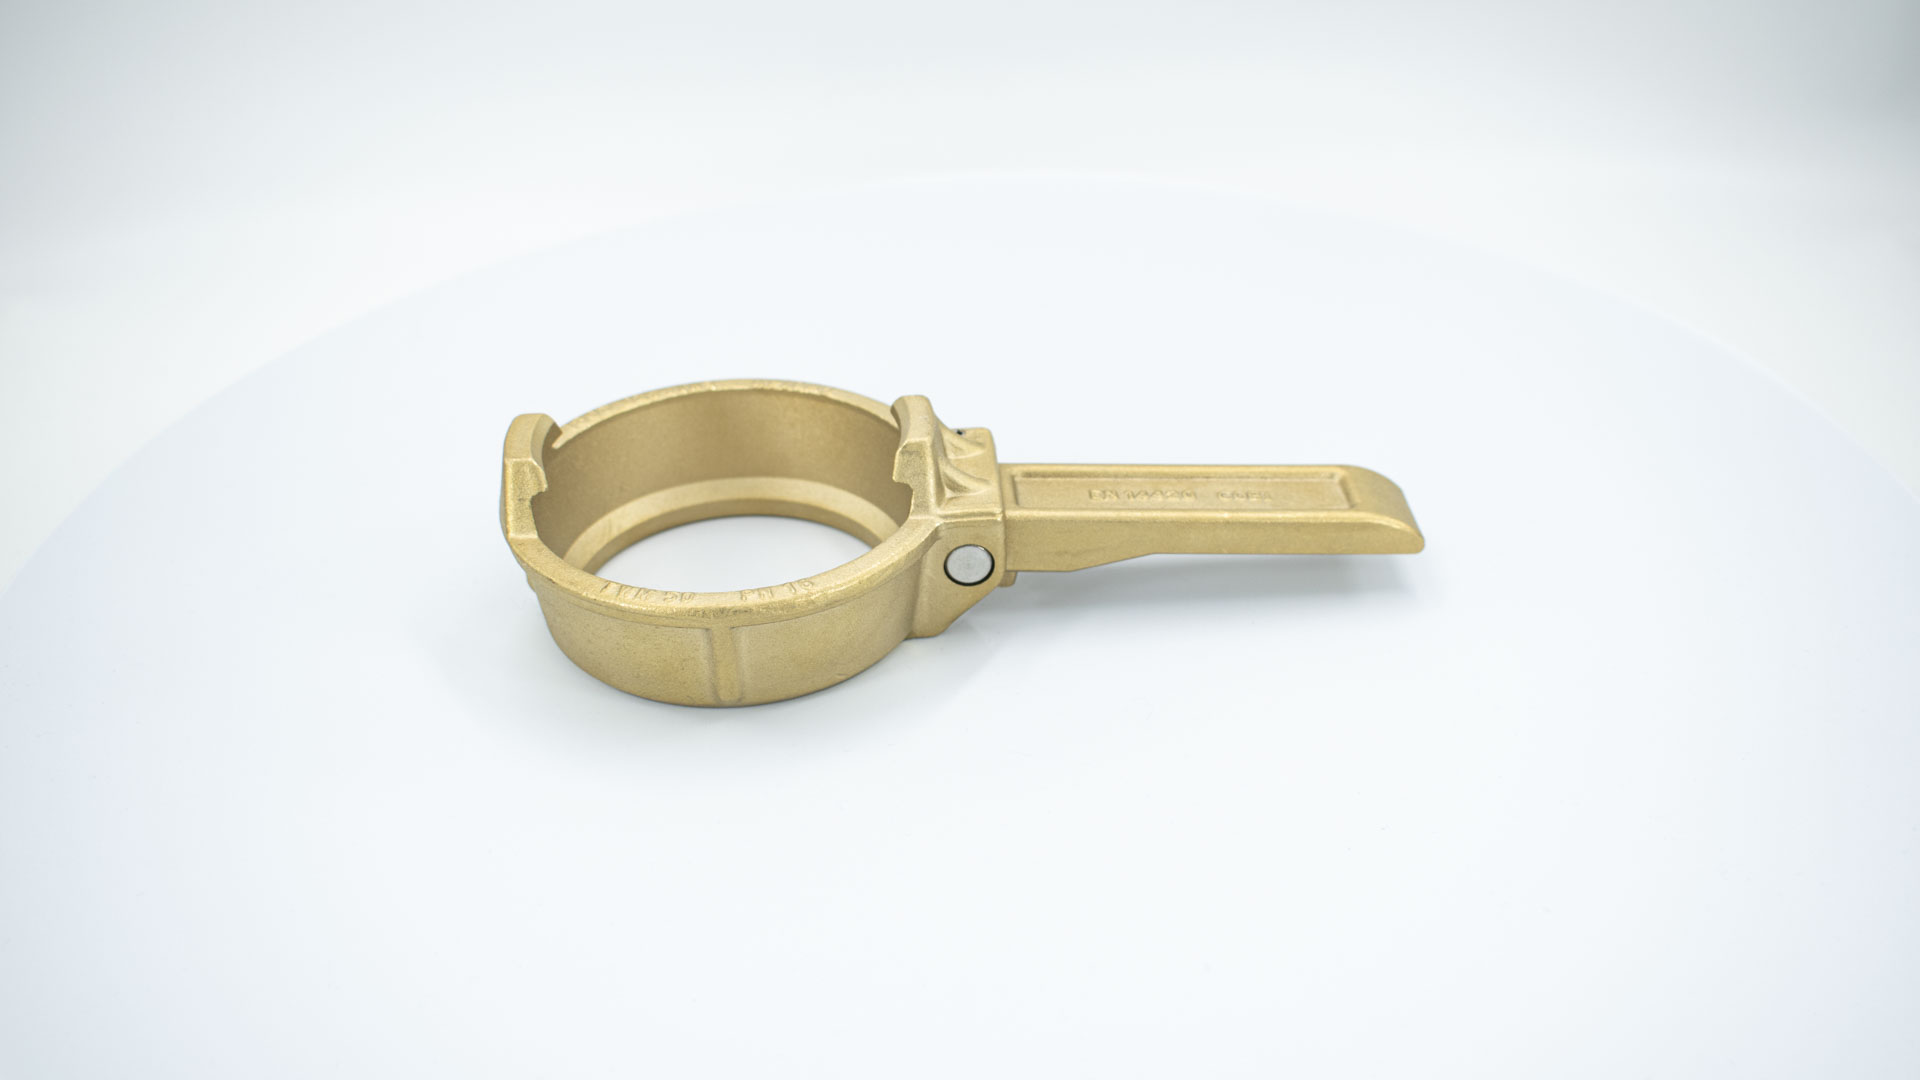 TW clamping ring with lever made of brass according to DIN EN 14420-6 (DIN 28450)